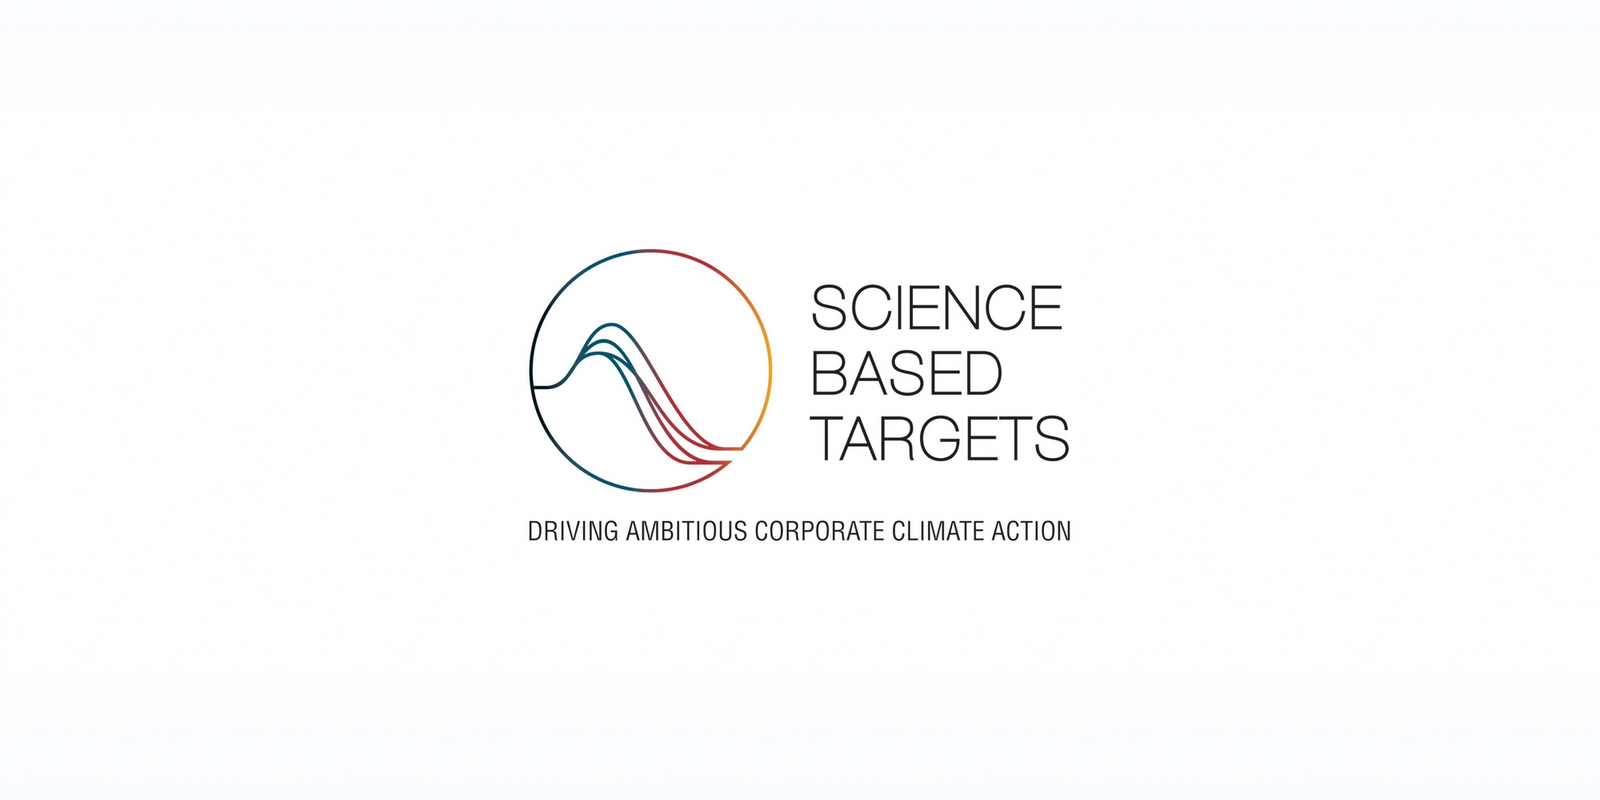 Science-based targets: a guide for companies